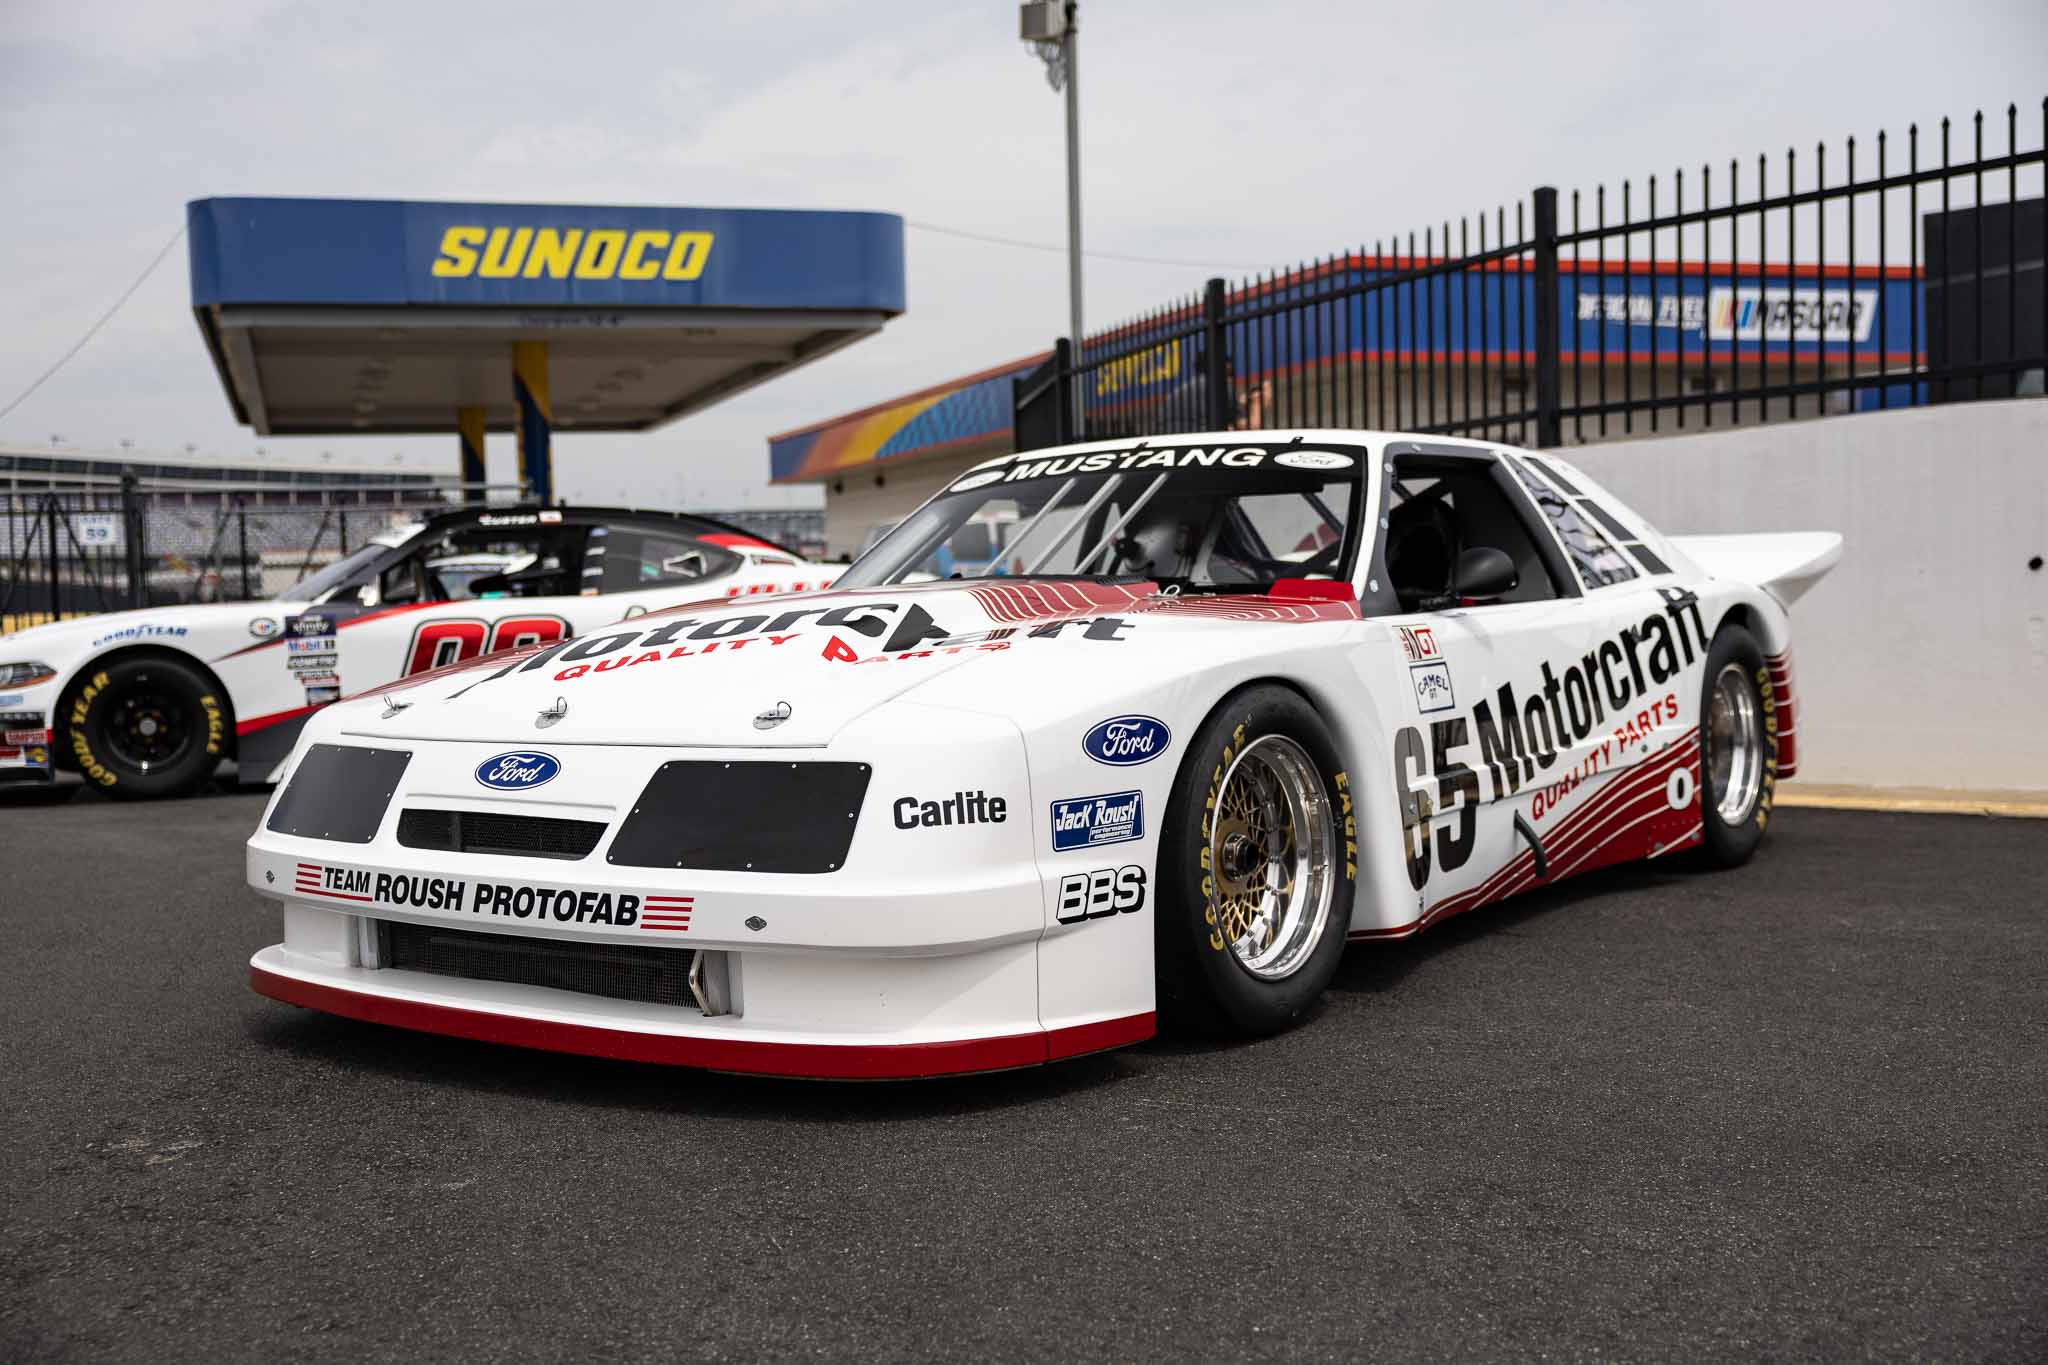 A foxbody Mustang sporting a Motorcraft livery and body kit at the Mustang 60th Anniversary